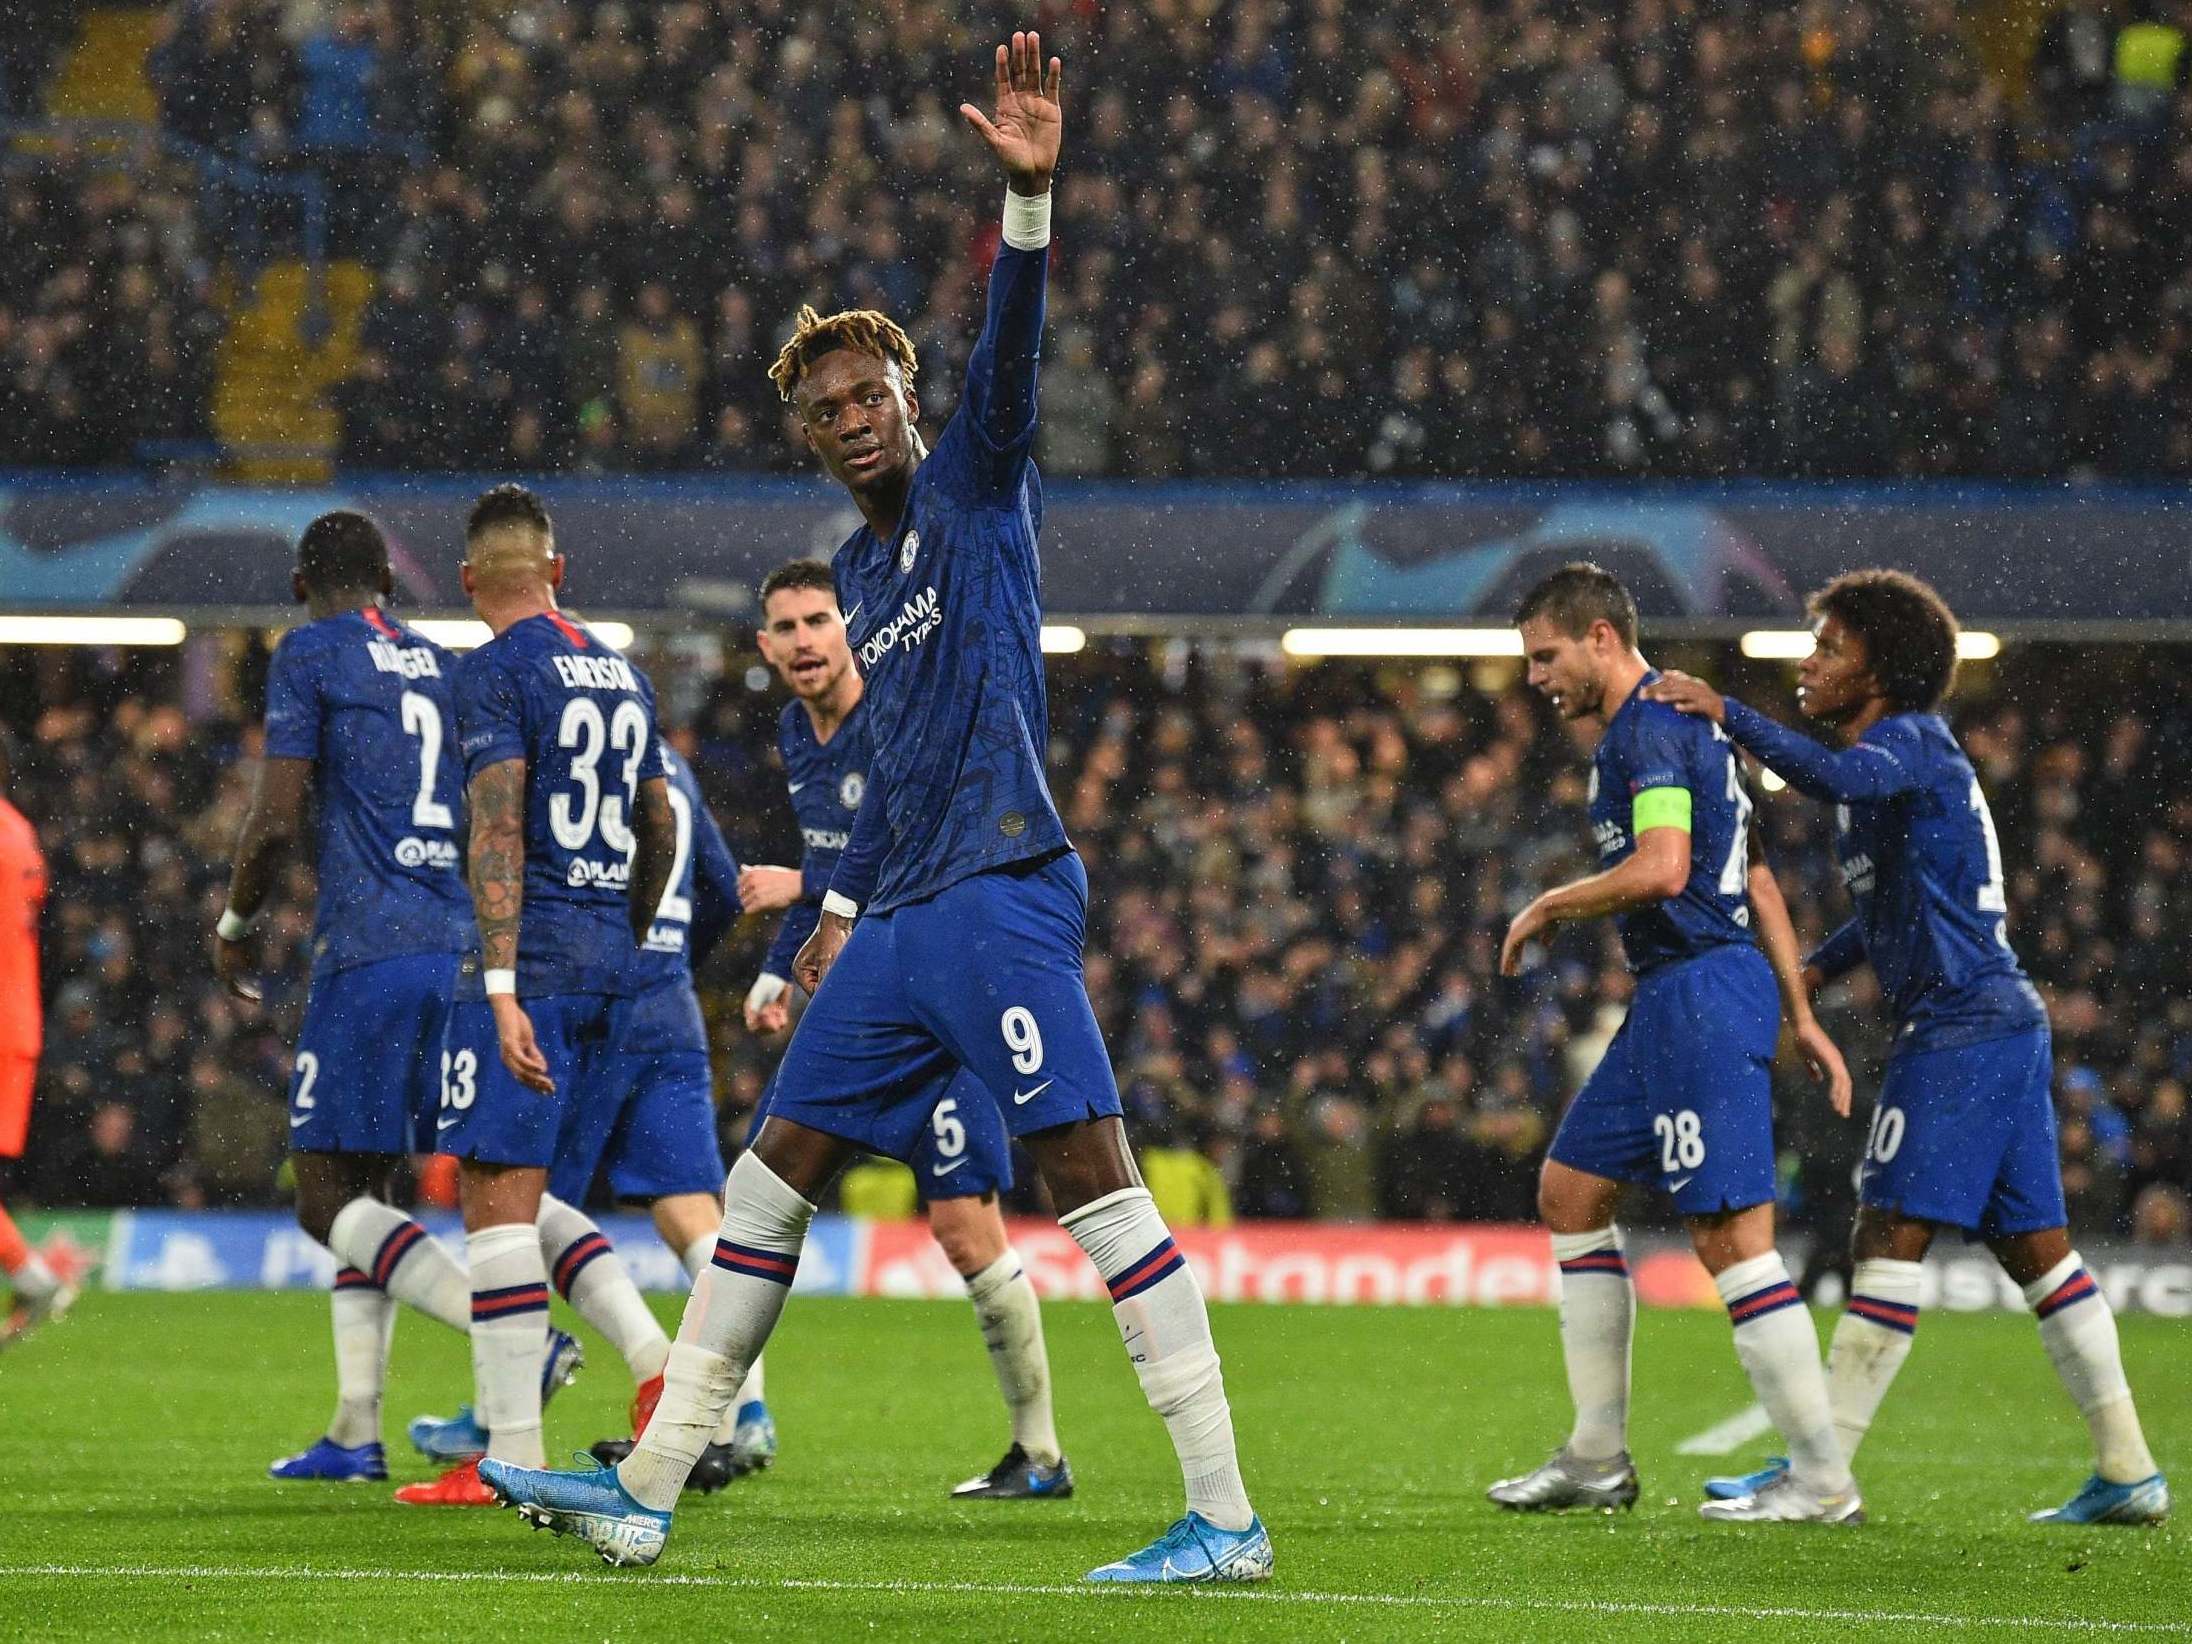 Chelsea secured their progression to the last 16 of the Champions League